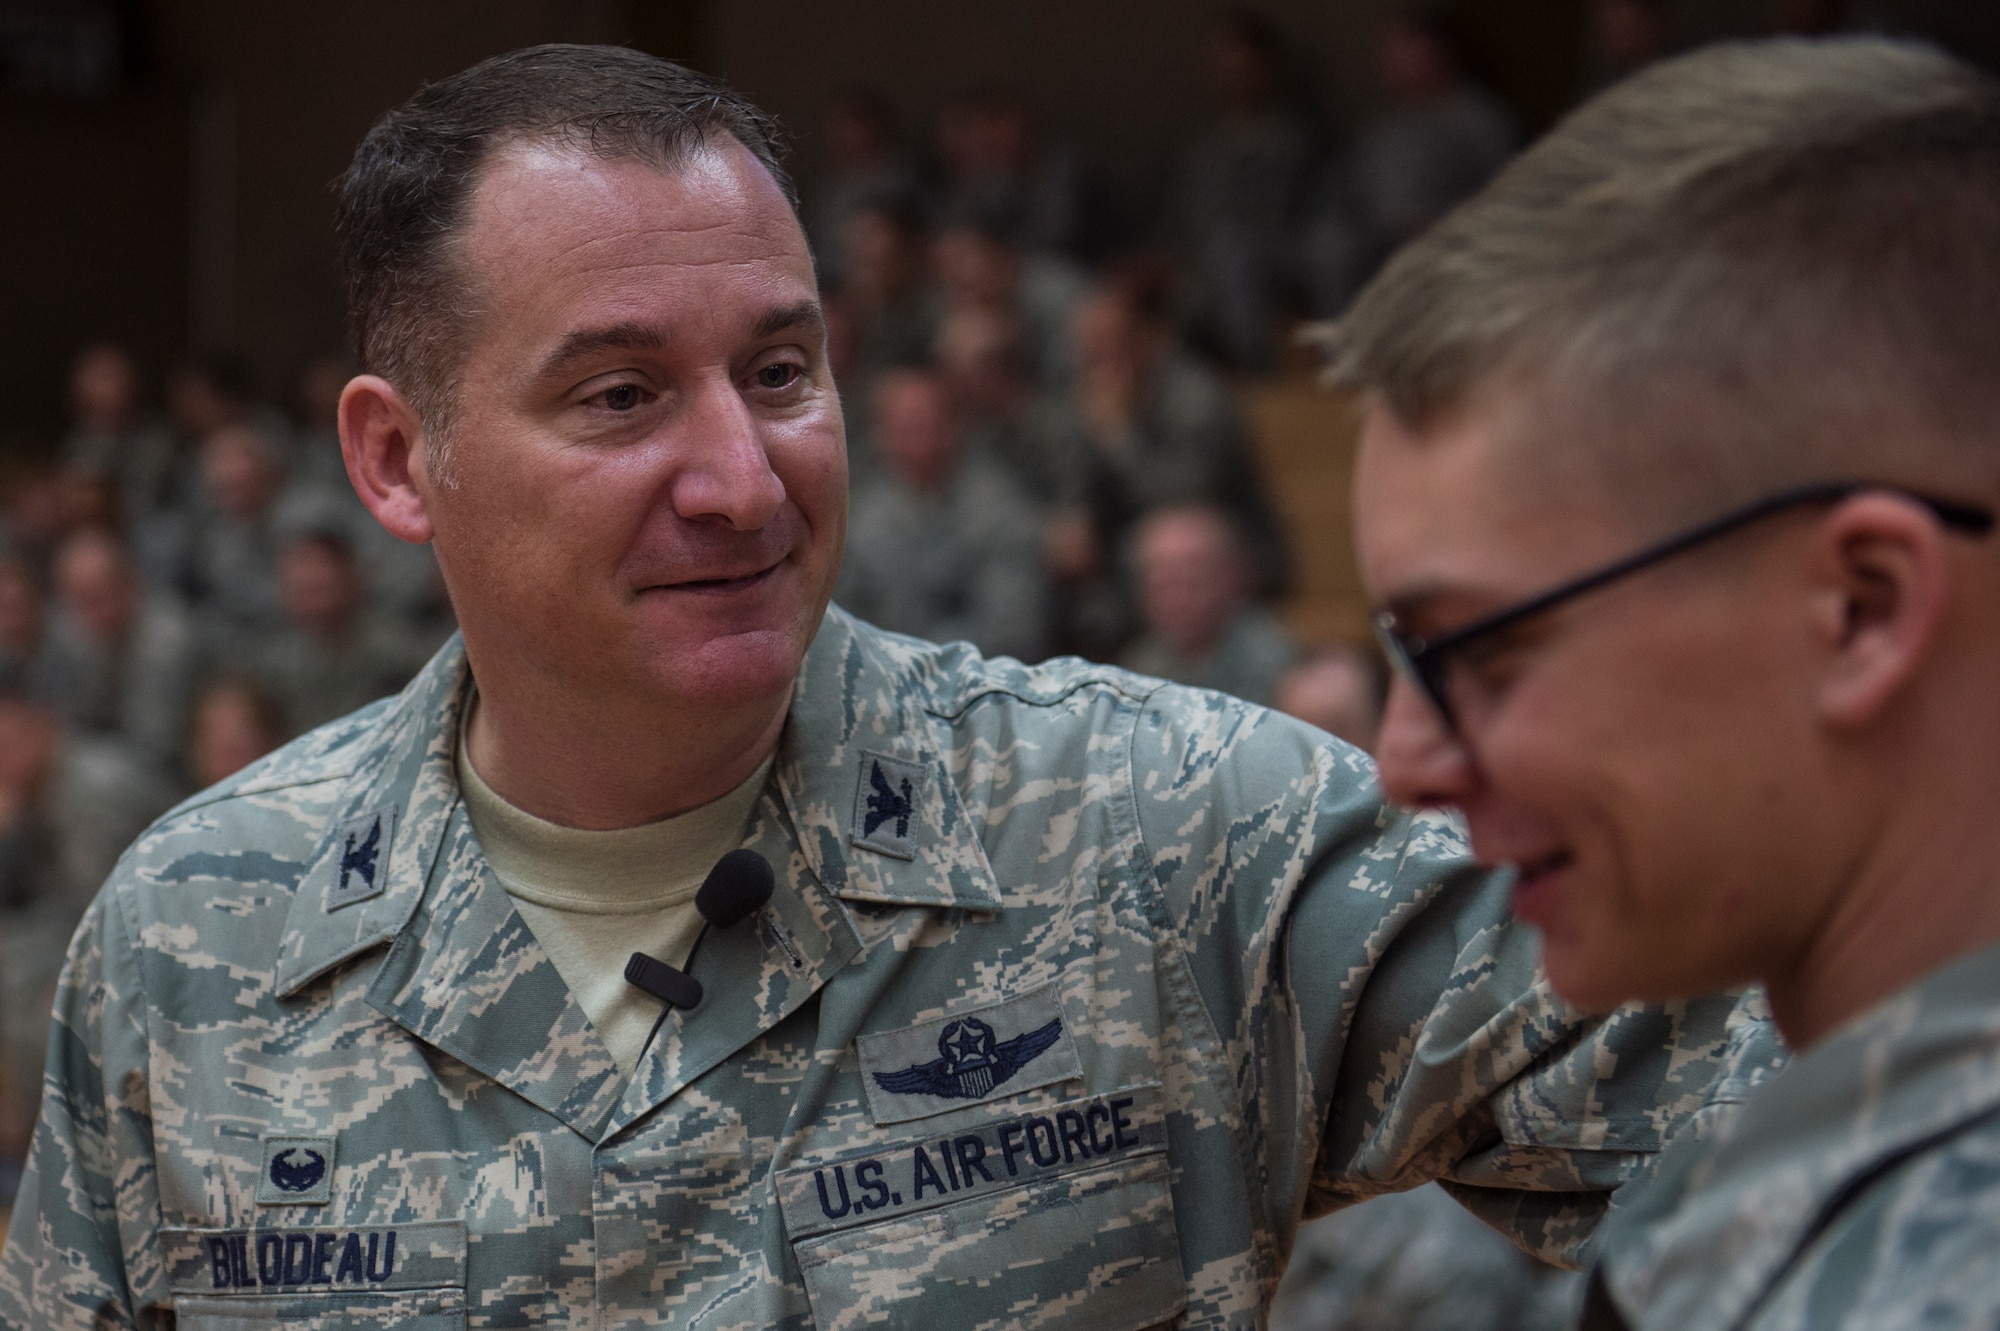 U.S. Air Force Col. Peter Bilodeau, 52nd Fighter Wing commander, speaks to an Airman during a commander's call at the Skelton Memorial Fitness Center July, 16, 2014, at Spangdahlem Air Base, Germany. Bilodeau and Chief Master Sgt. Brian Gates, 52nd FW command chief talked about their background, families and priorities, and later held a question and answer session. (U.S. Air Force photo by Senior Airman Rusty Frank/Released)